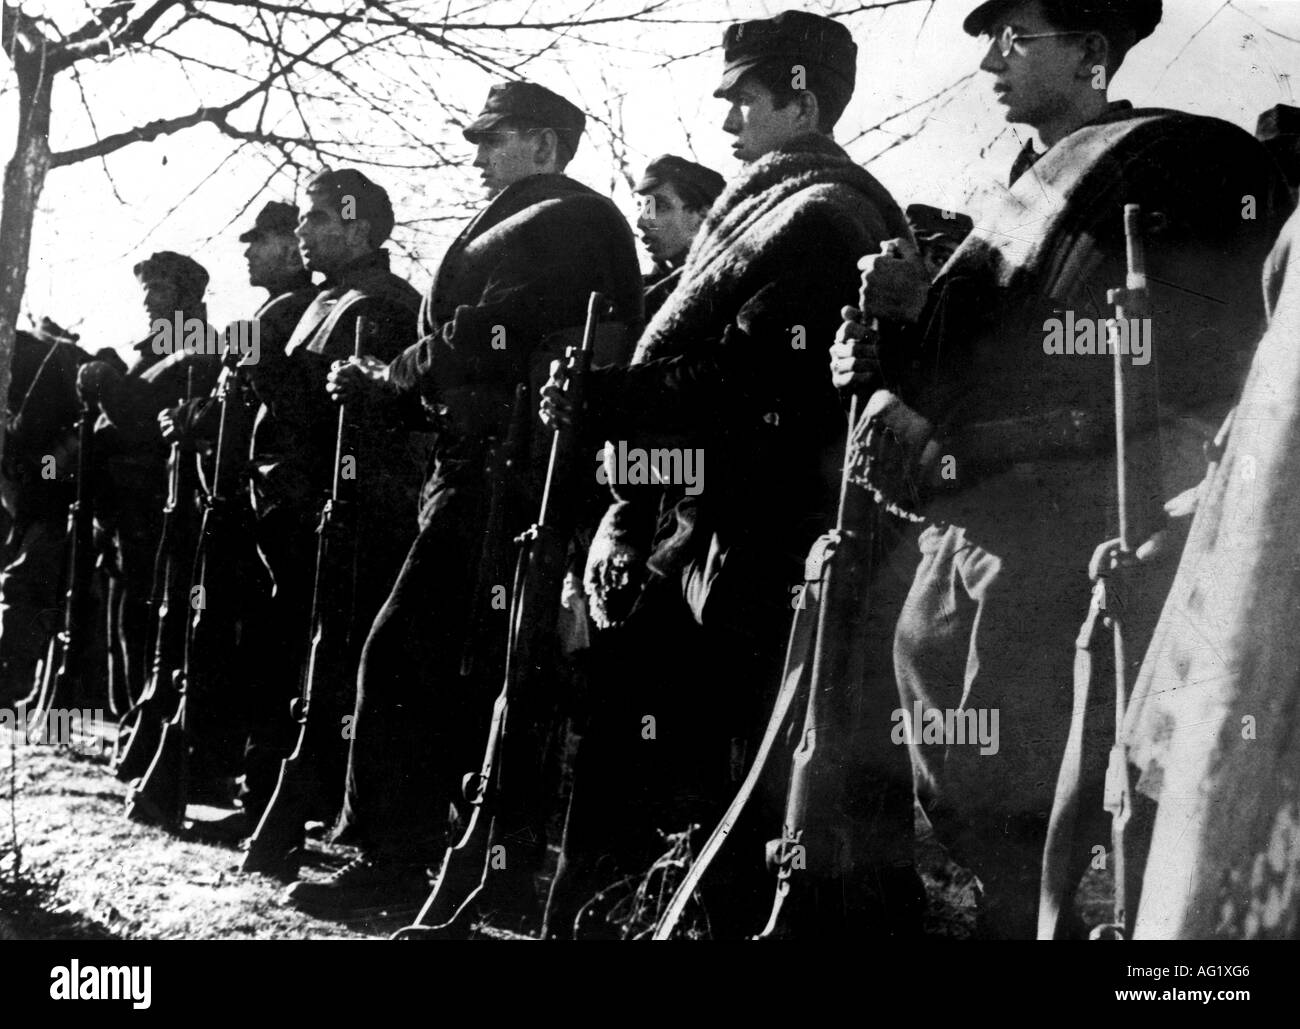 geography / travel, Spain, Spanish Civil War 1936 - 1939, battalion of an International Brigade formed up, 8.1.1937, republicans, foreign volunteers, 20th century, historic, historical, guns, rifles, military, uniform, uniforms, Europe, male, man, men, people, 1930s, Stock Photo